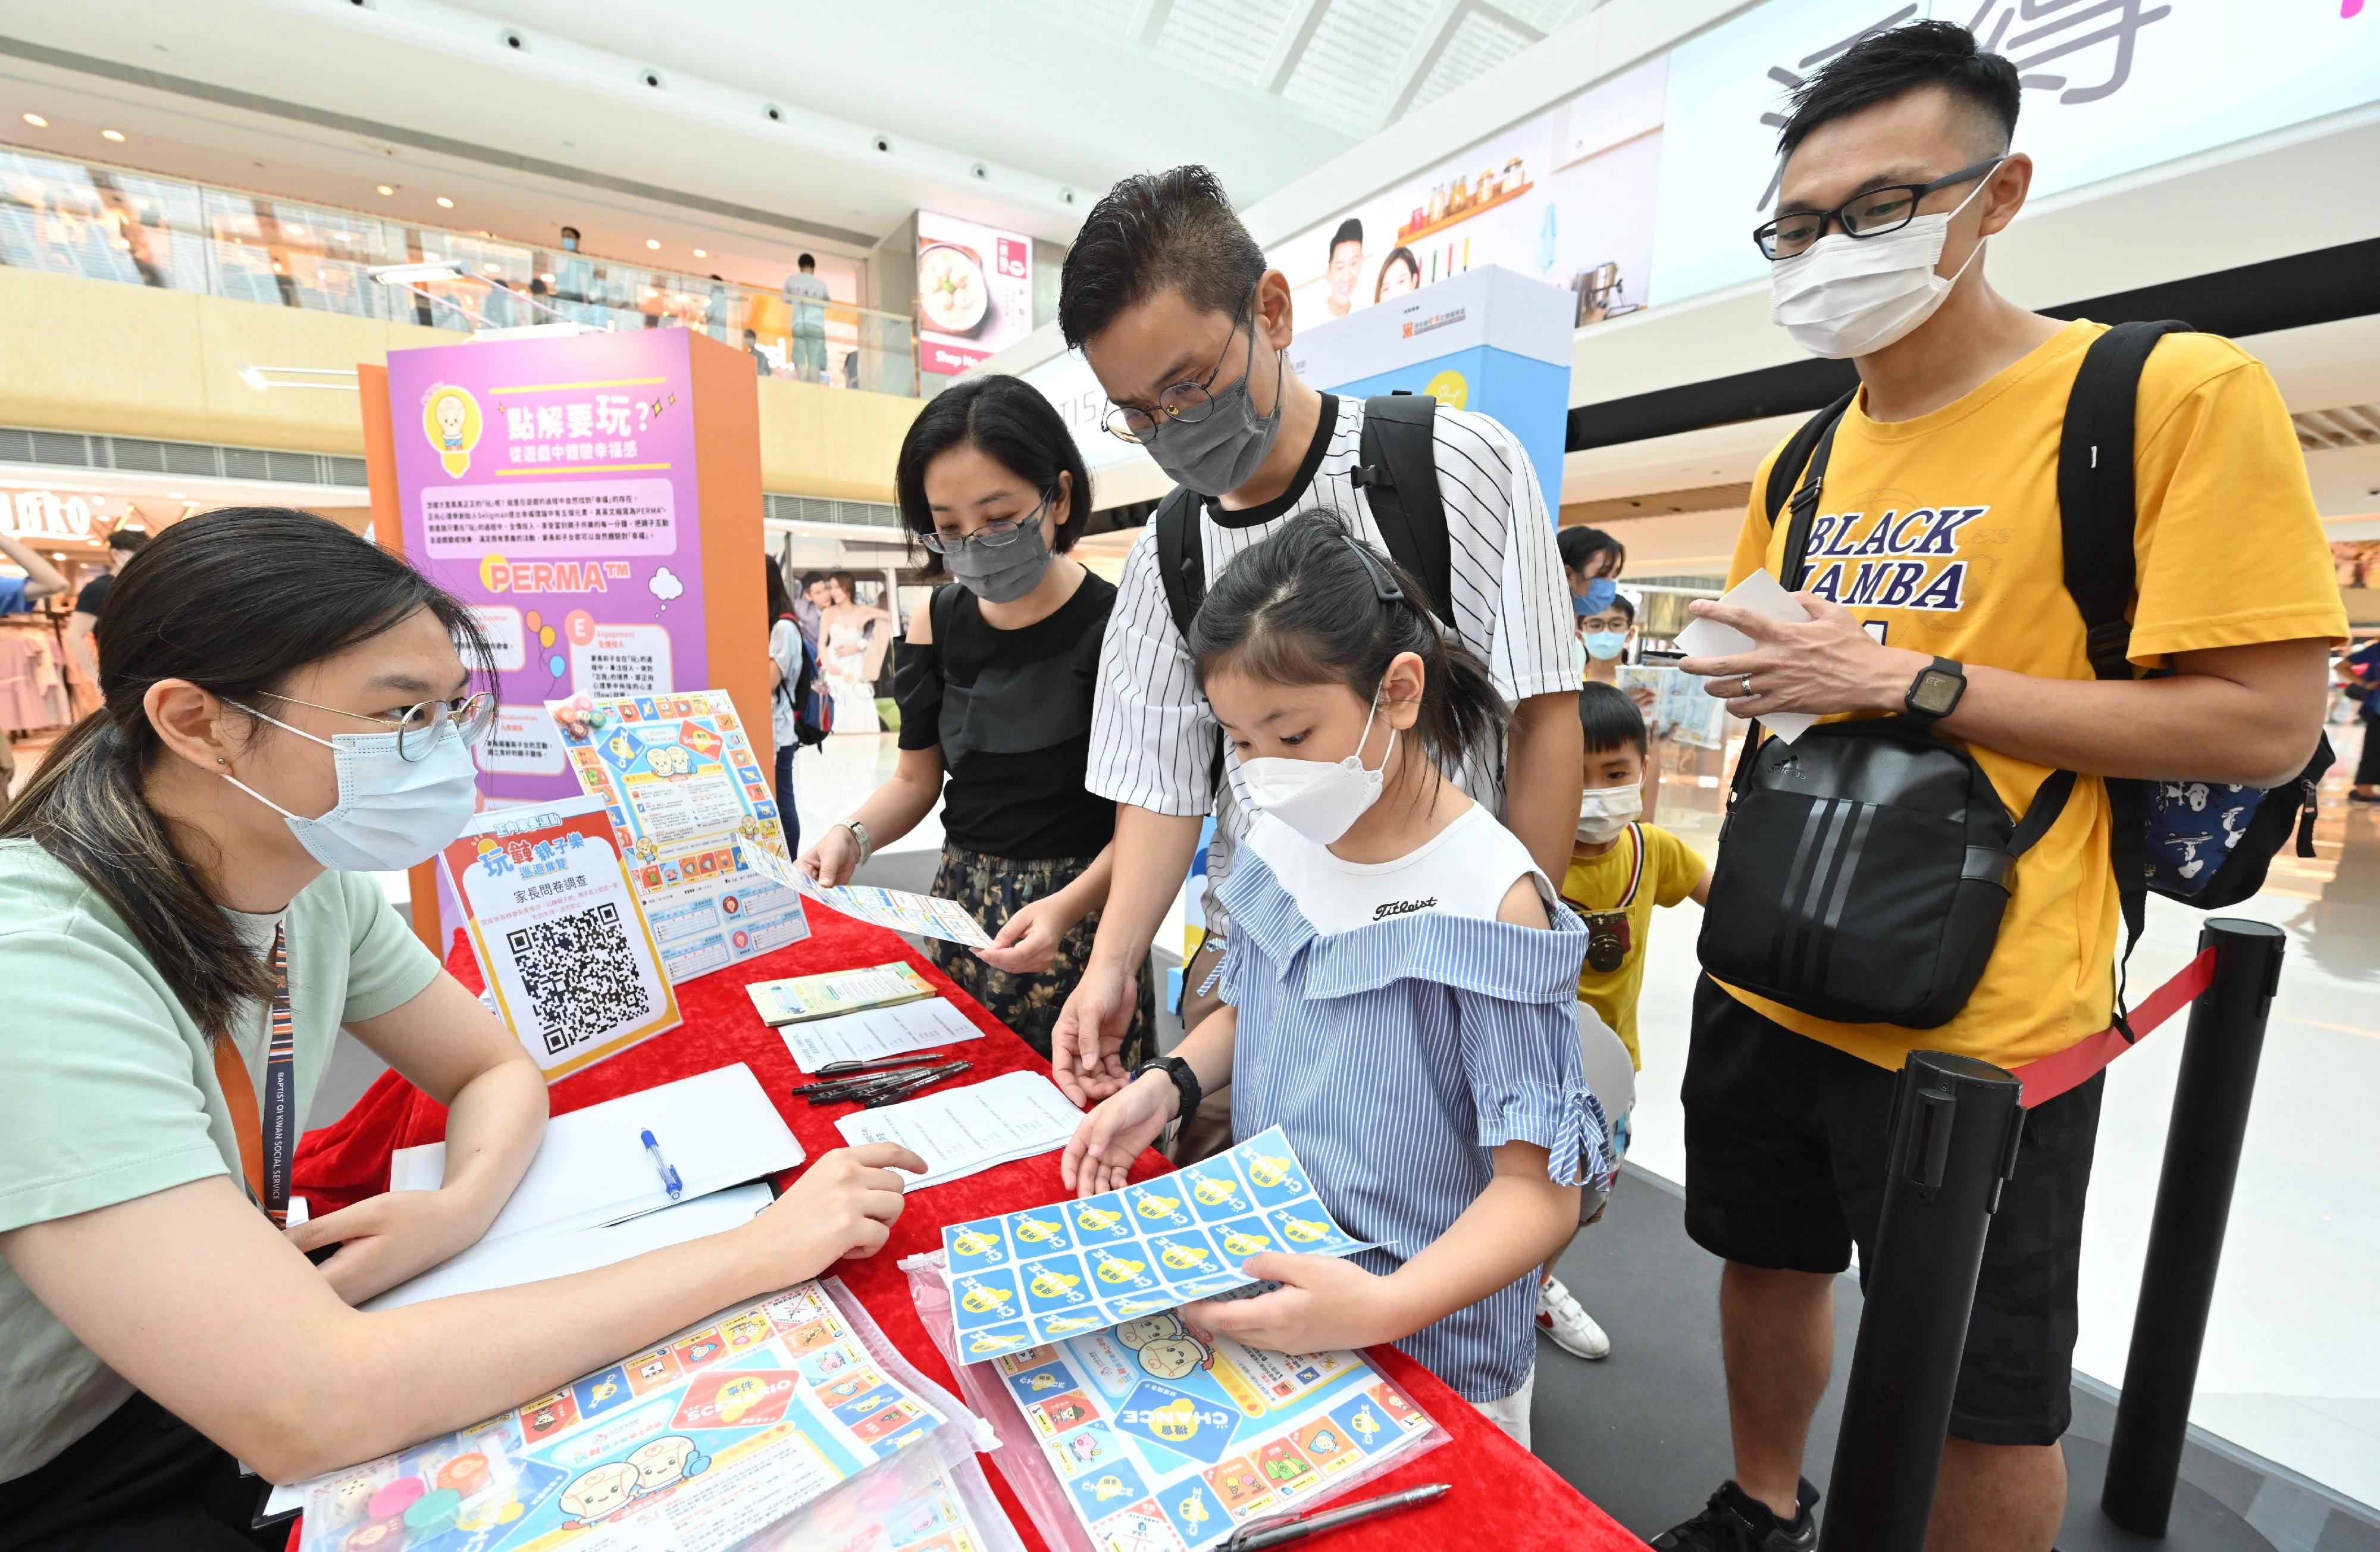 The Education Bureau today (June 18) held the "Playtime with Children" Roving Exhibition and distributed board games as souvenirs.